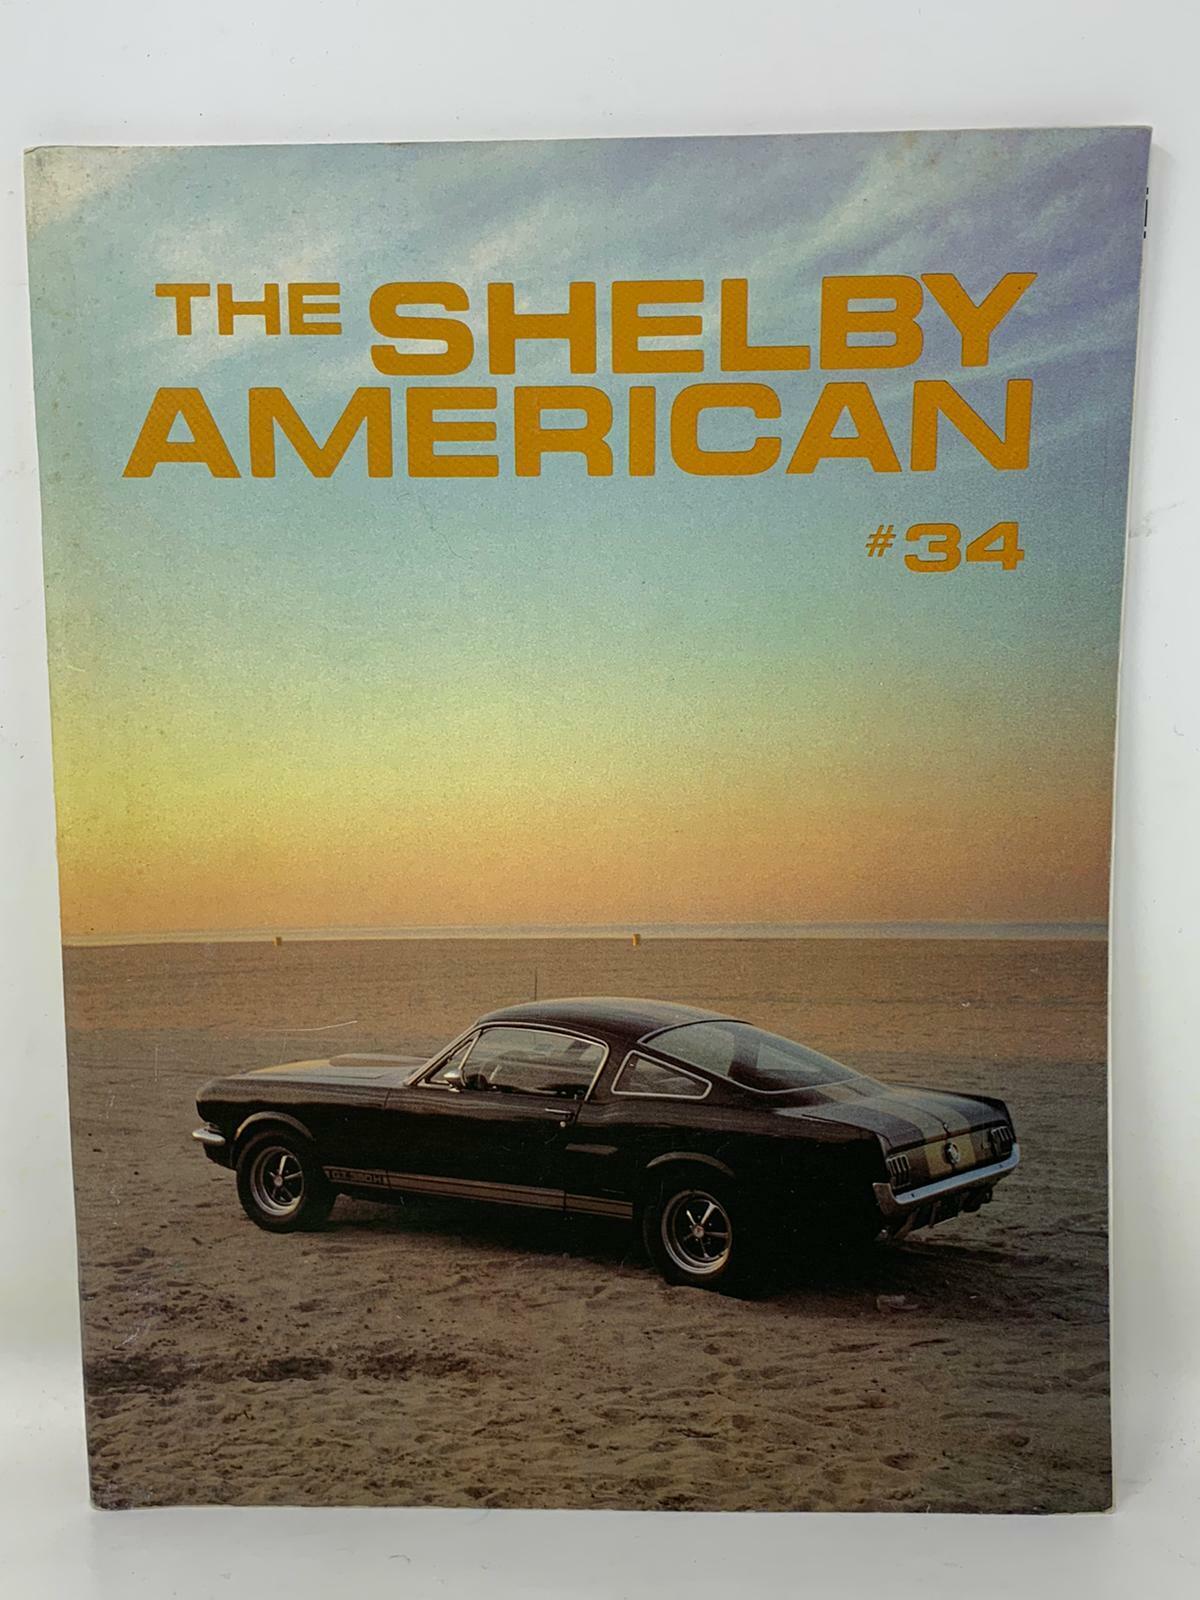 The Shelby American #34 Magazine, 1981